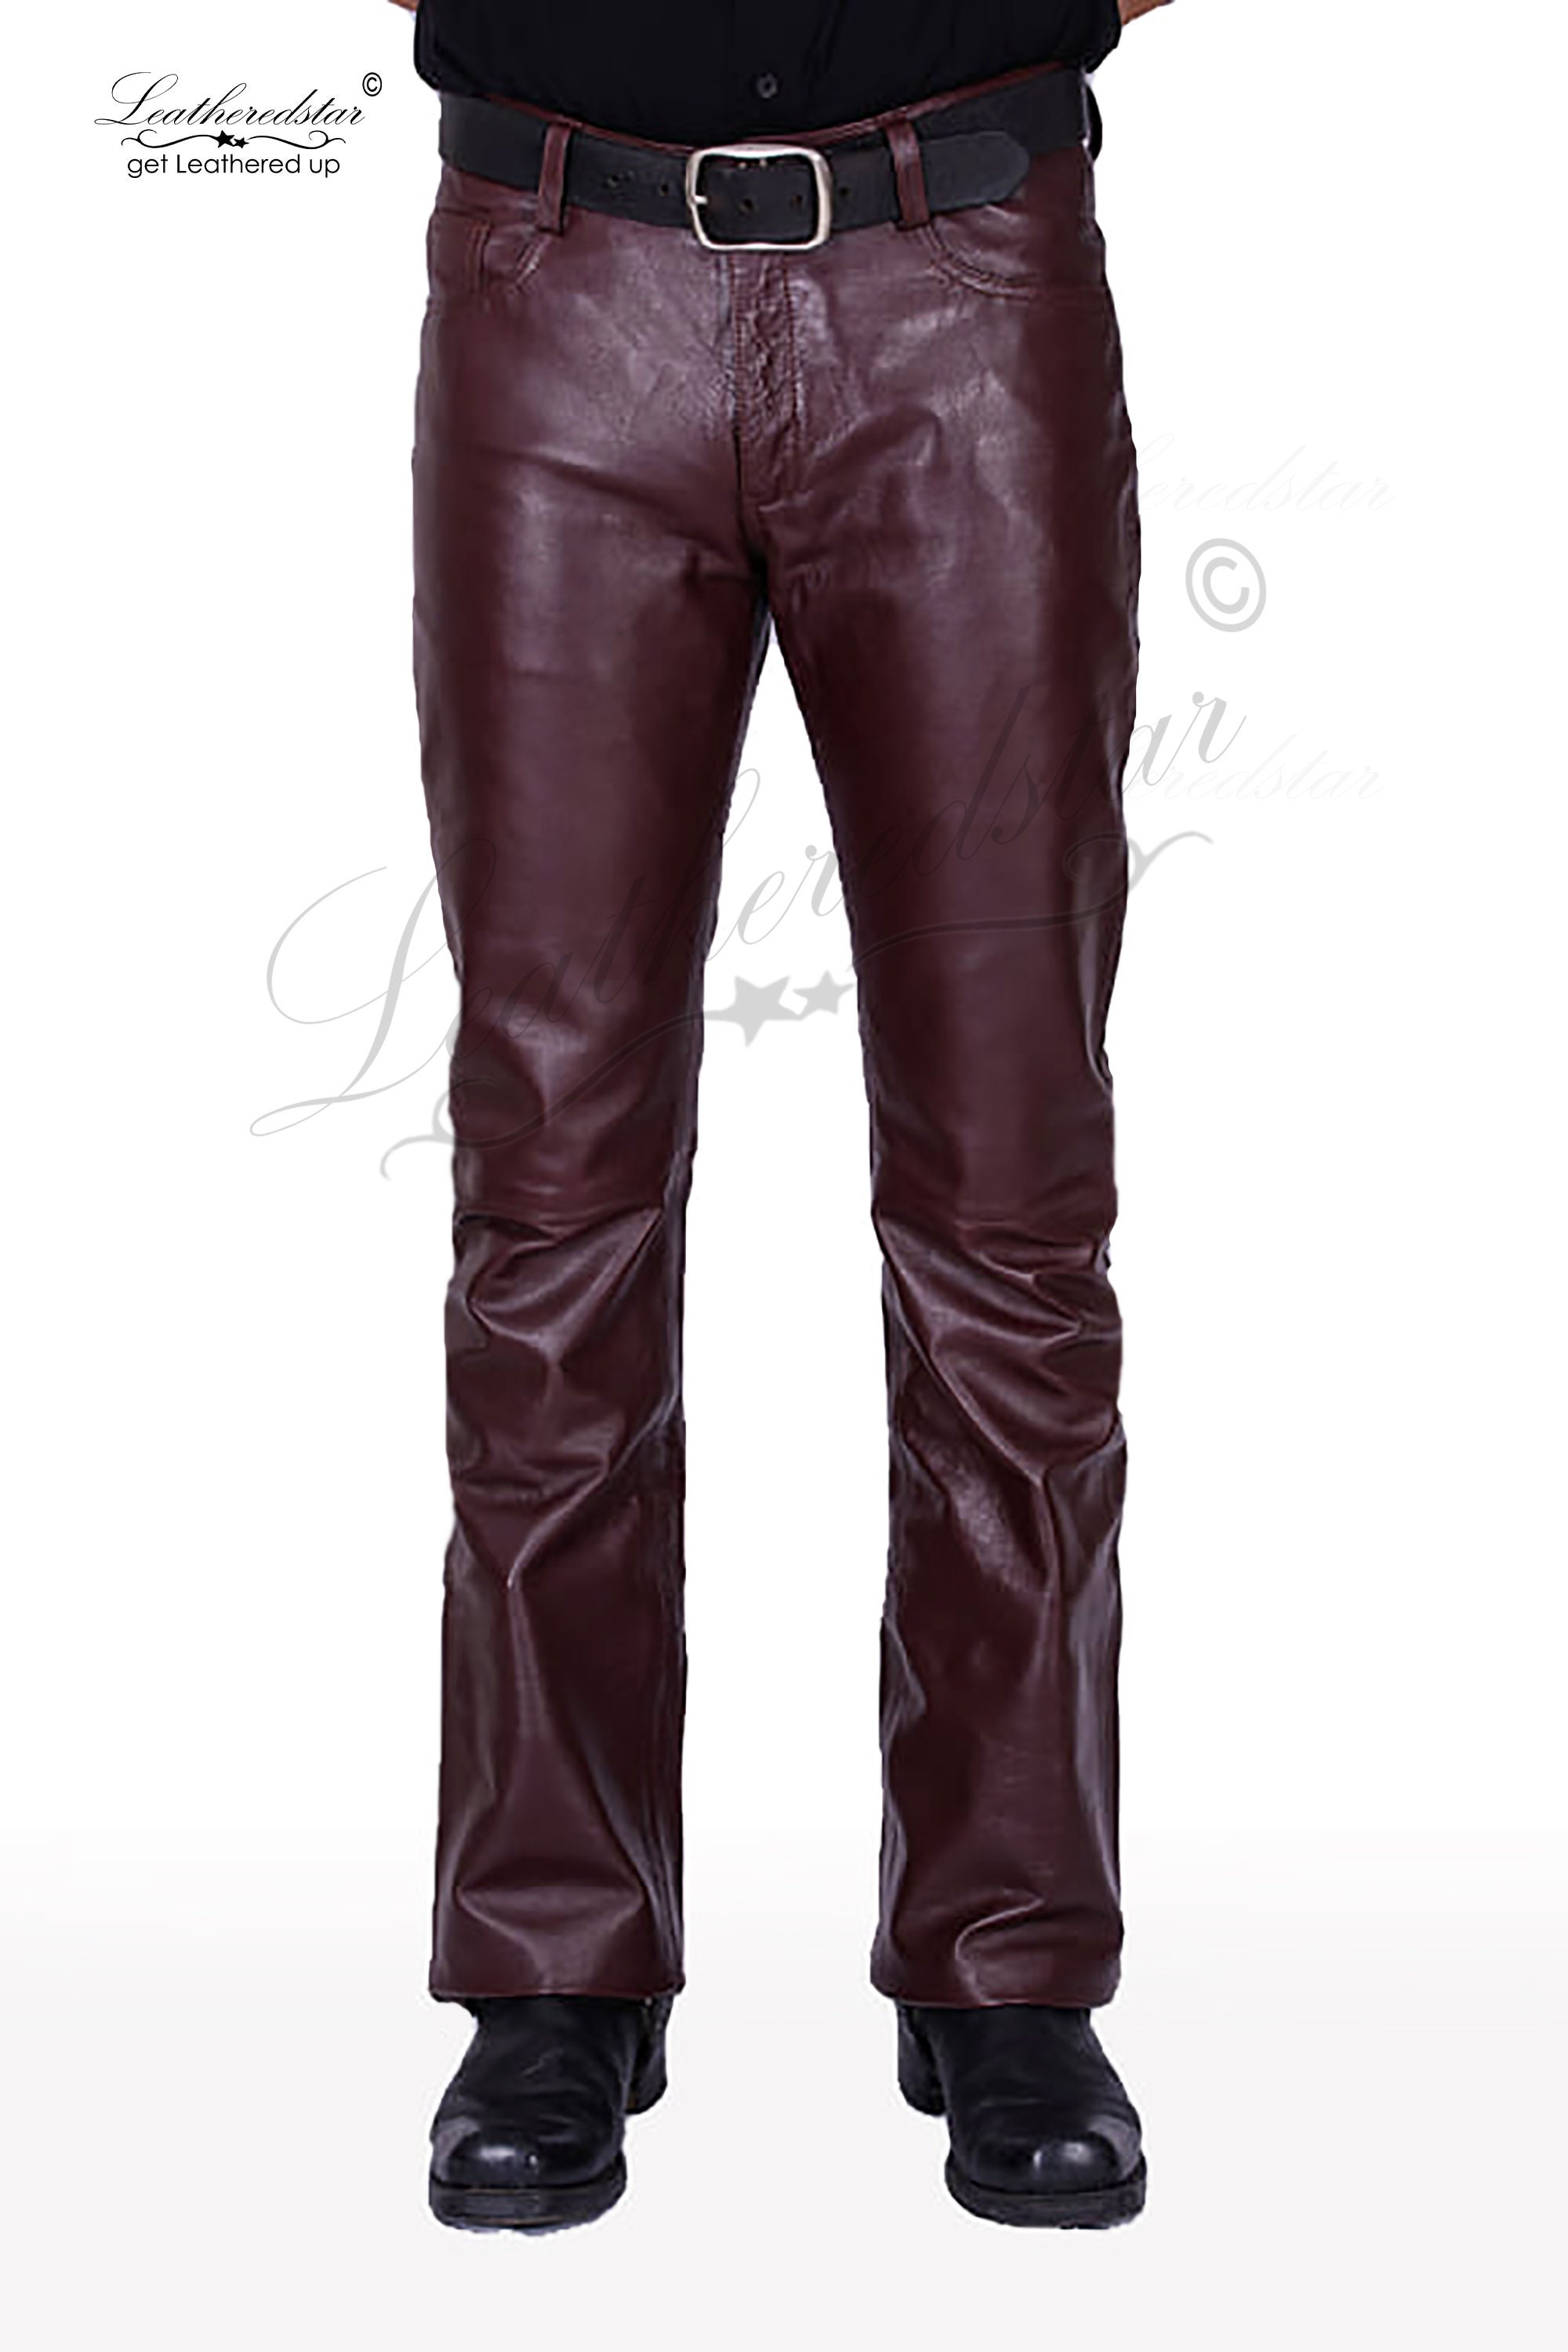 Men Slim-Fit Leather Pants Semi-Leather Pants Stitching Skinny Leather  Pants Suitable for Everyday Wear (Color : Black, Size : 30)